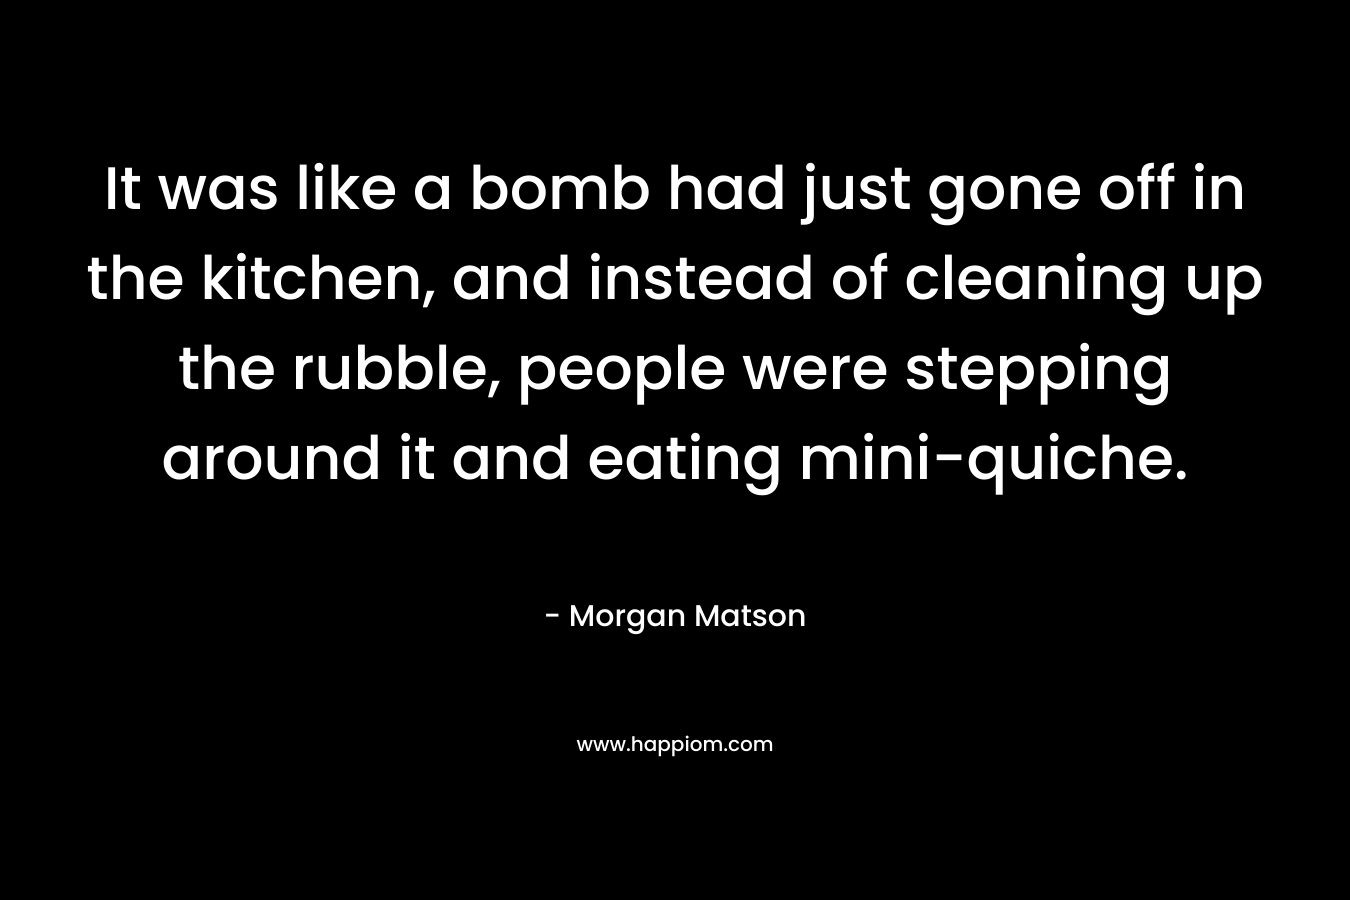 It was like a bomb had just gone off in the kitchen, and instead of cleaning up the rubble, people were stepping around it and eating mini-quiche. – Morgan Matson